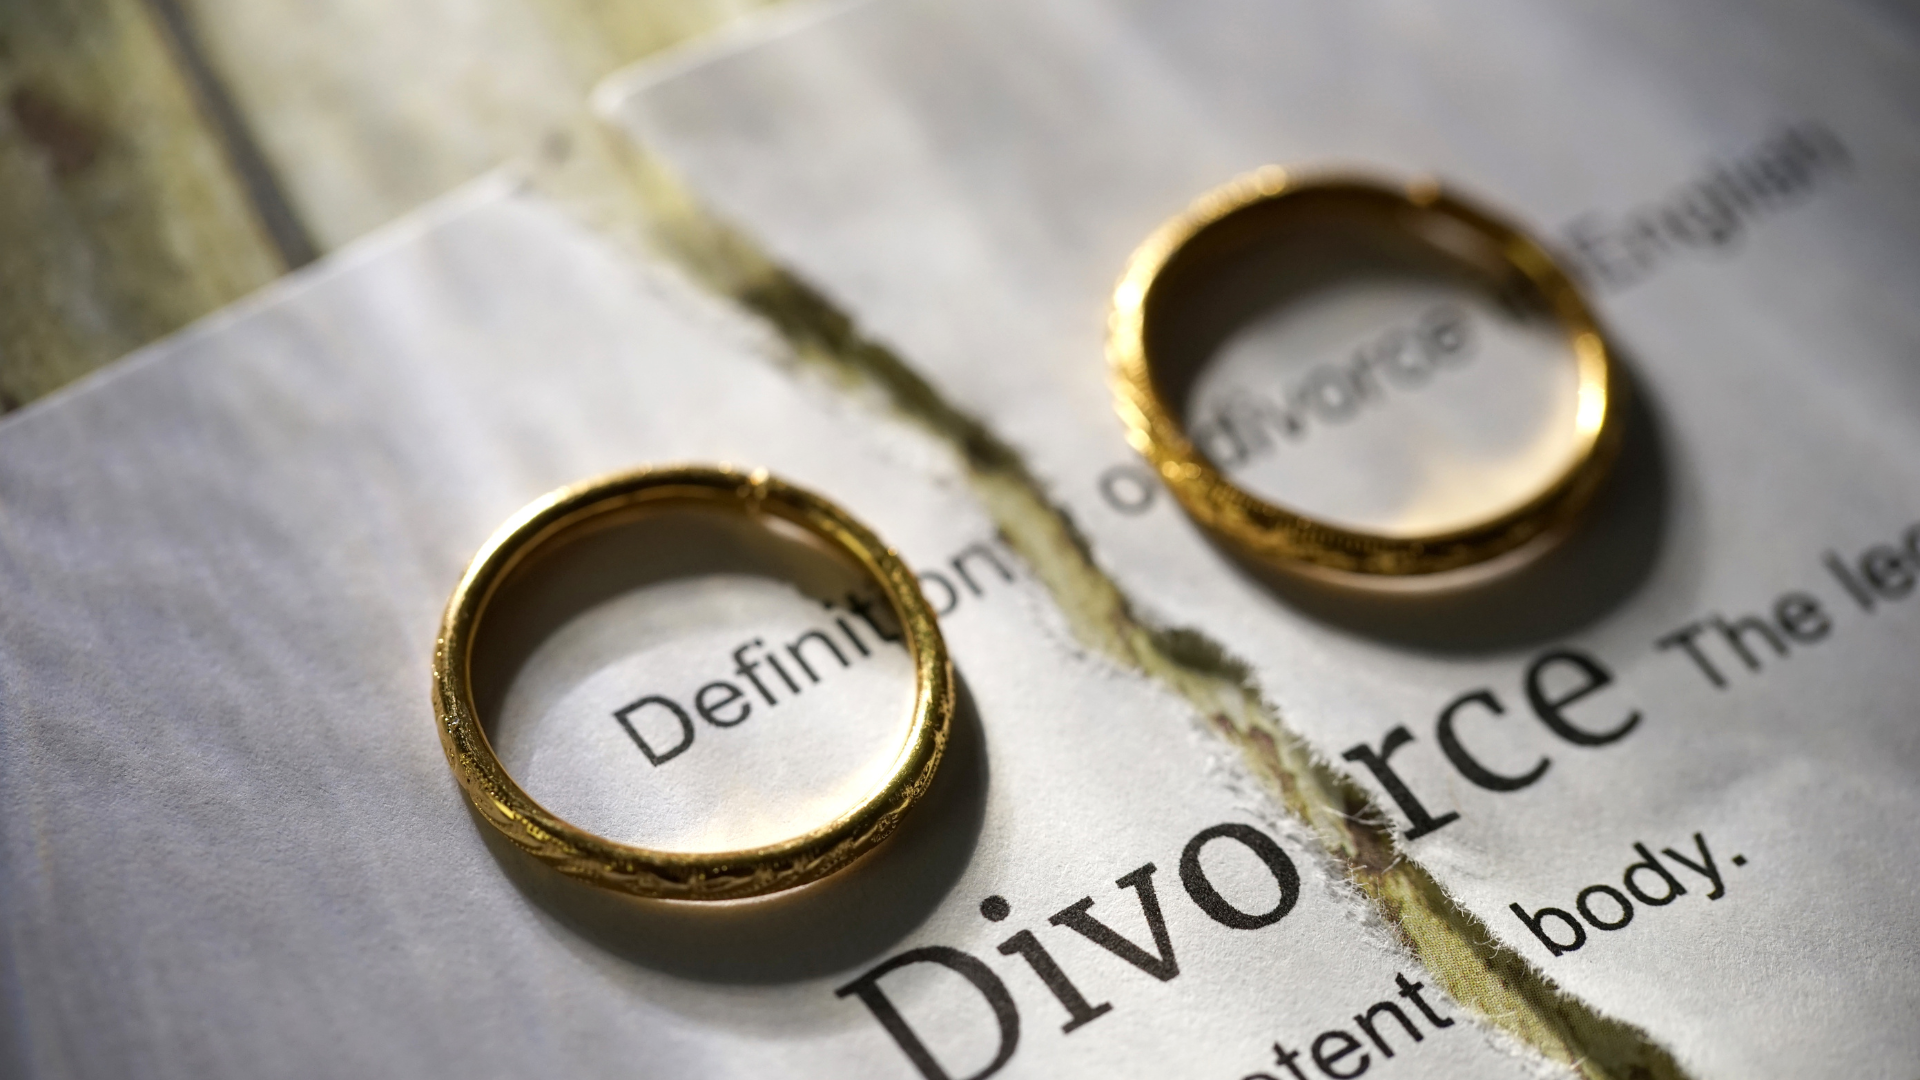 Common Factors That May Delay an Agreed Divorce